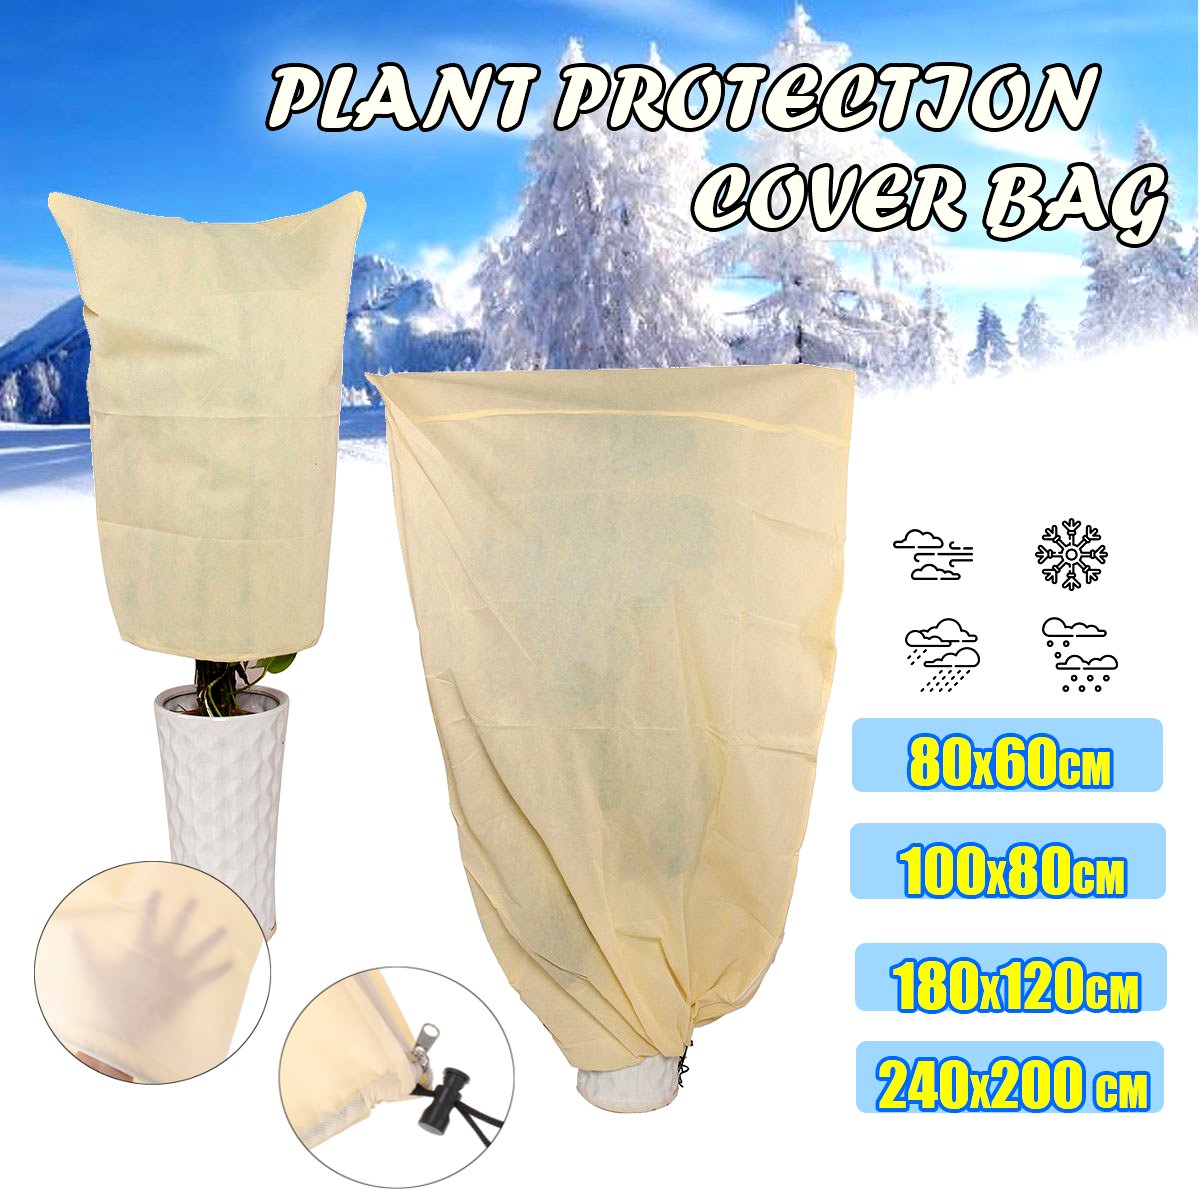 Frost-Plant-Warm-Cover-Tree-Shrub-Plant-Protection-Bag-Yard-Garden-Decor-Winter-Container-1590365-1